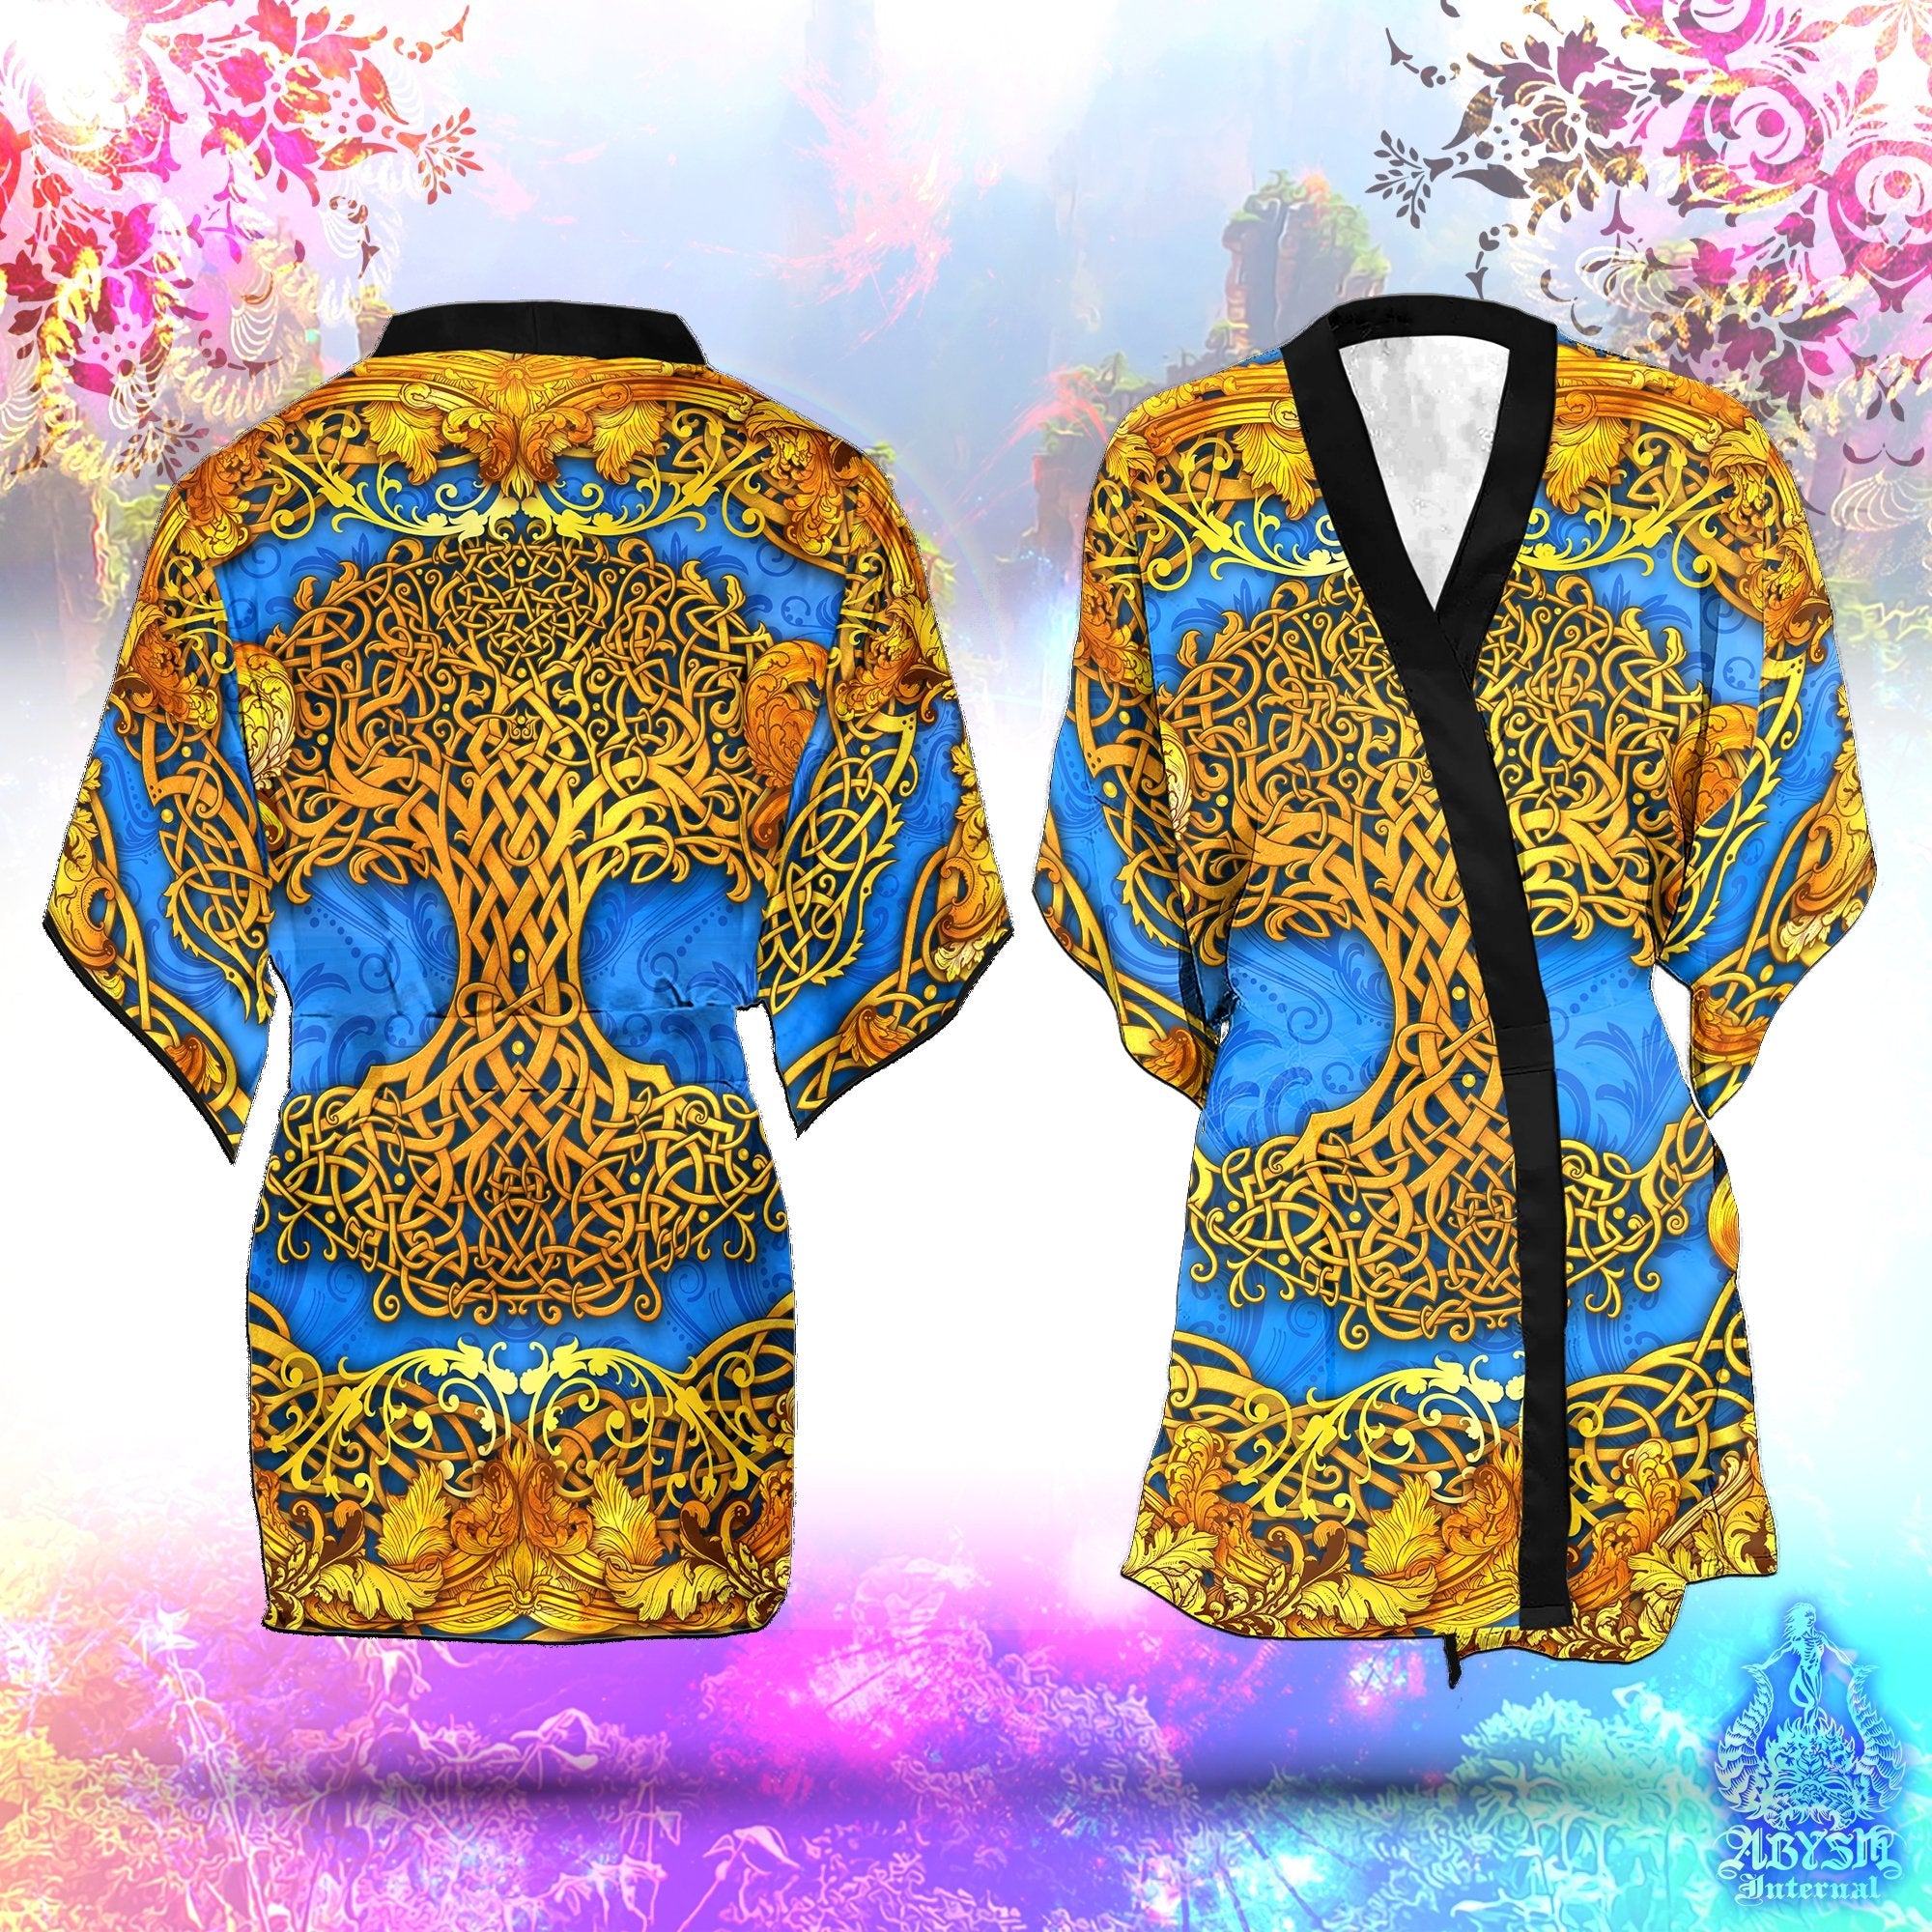 Tree of Life Cover Up, Beach Outfit, Celtic Party Kimono, Wicca Summer Festival Robe, Witchy Indie and Alternative Clothing, Unisex - Cyan Gold - Abysm Internal